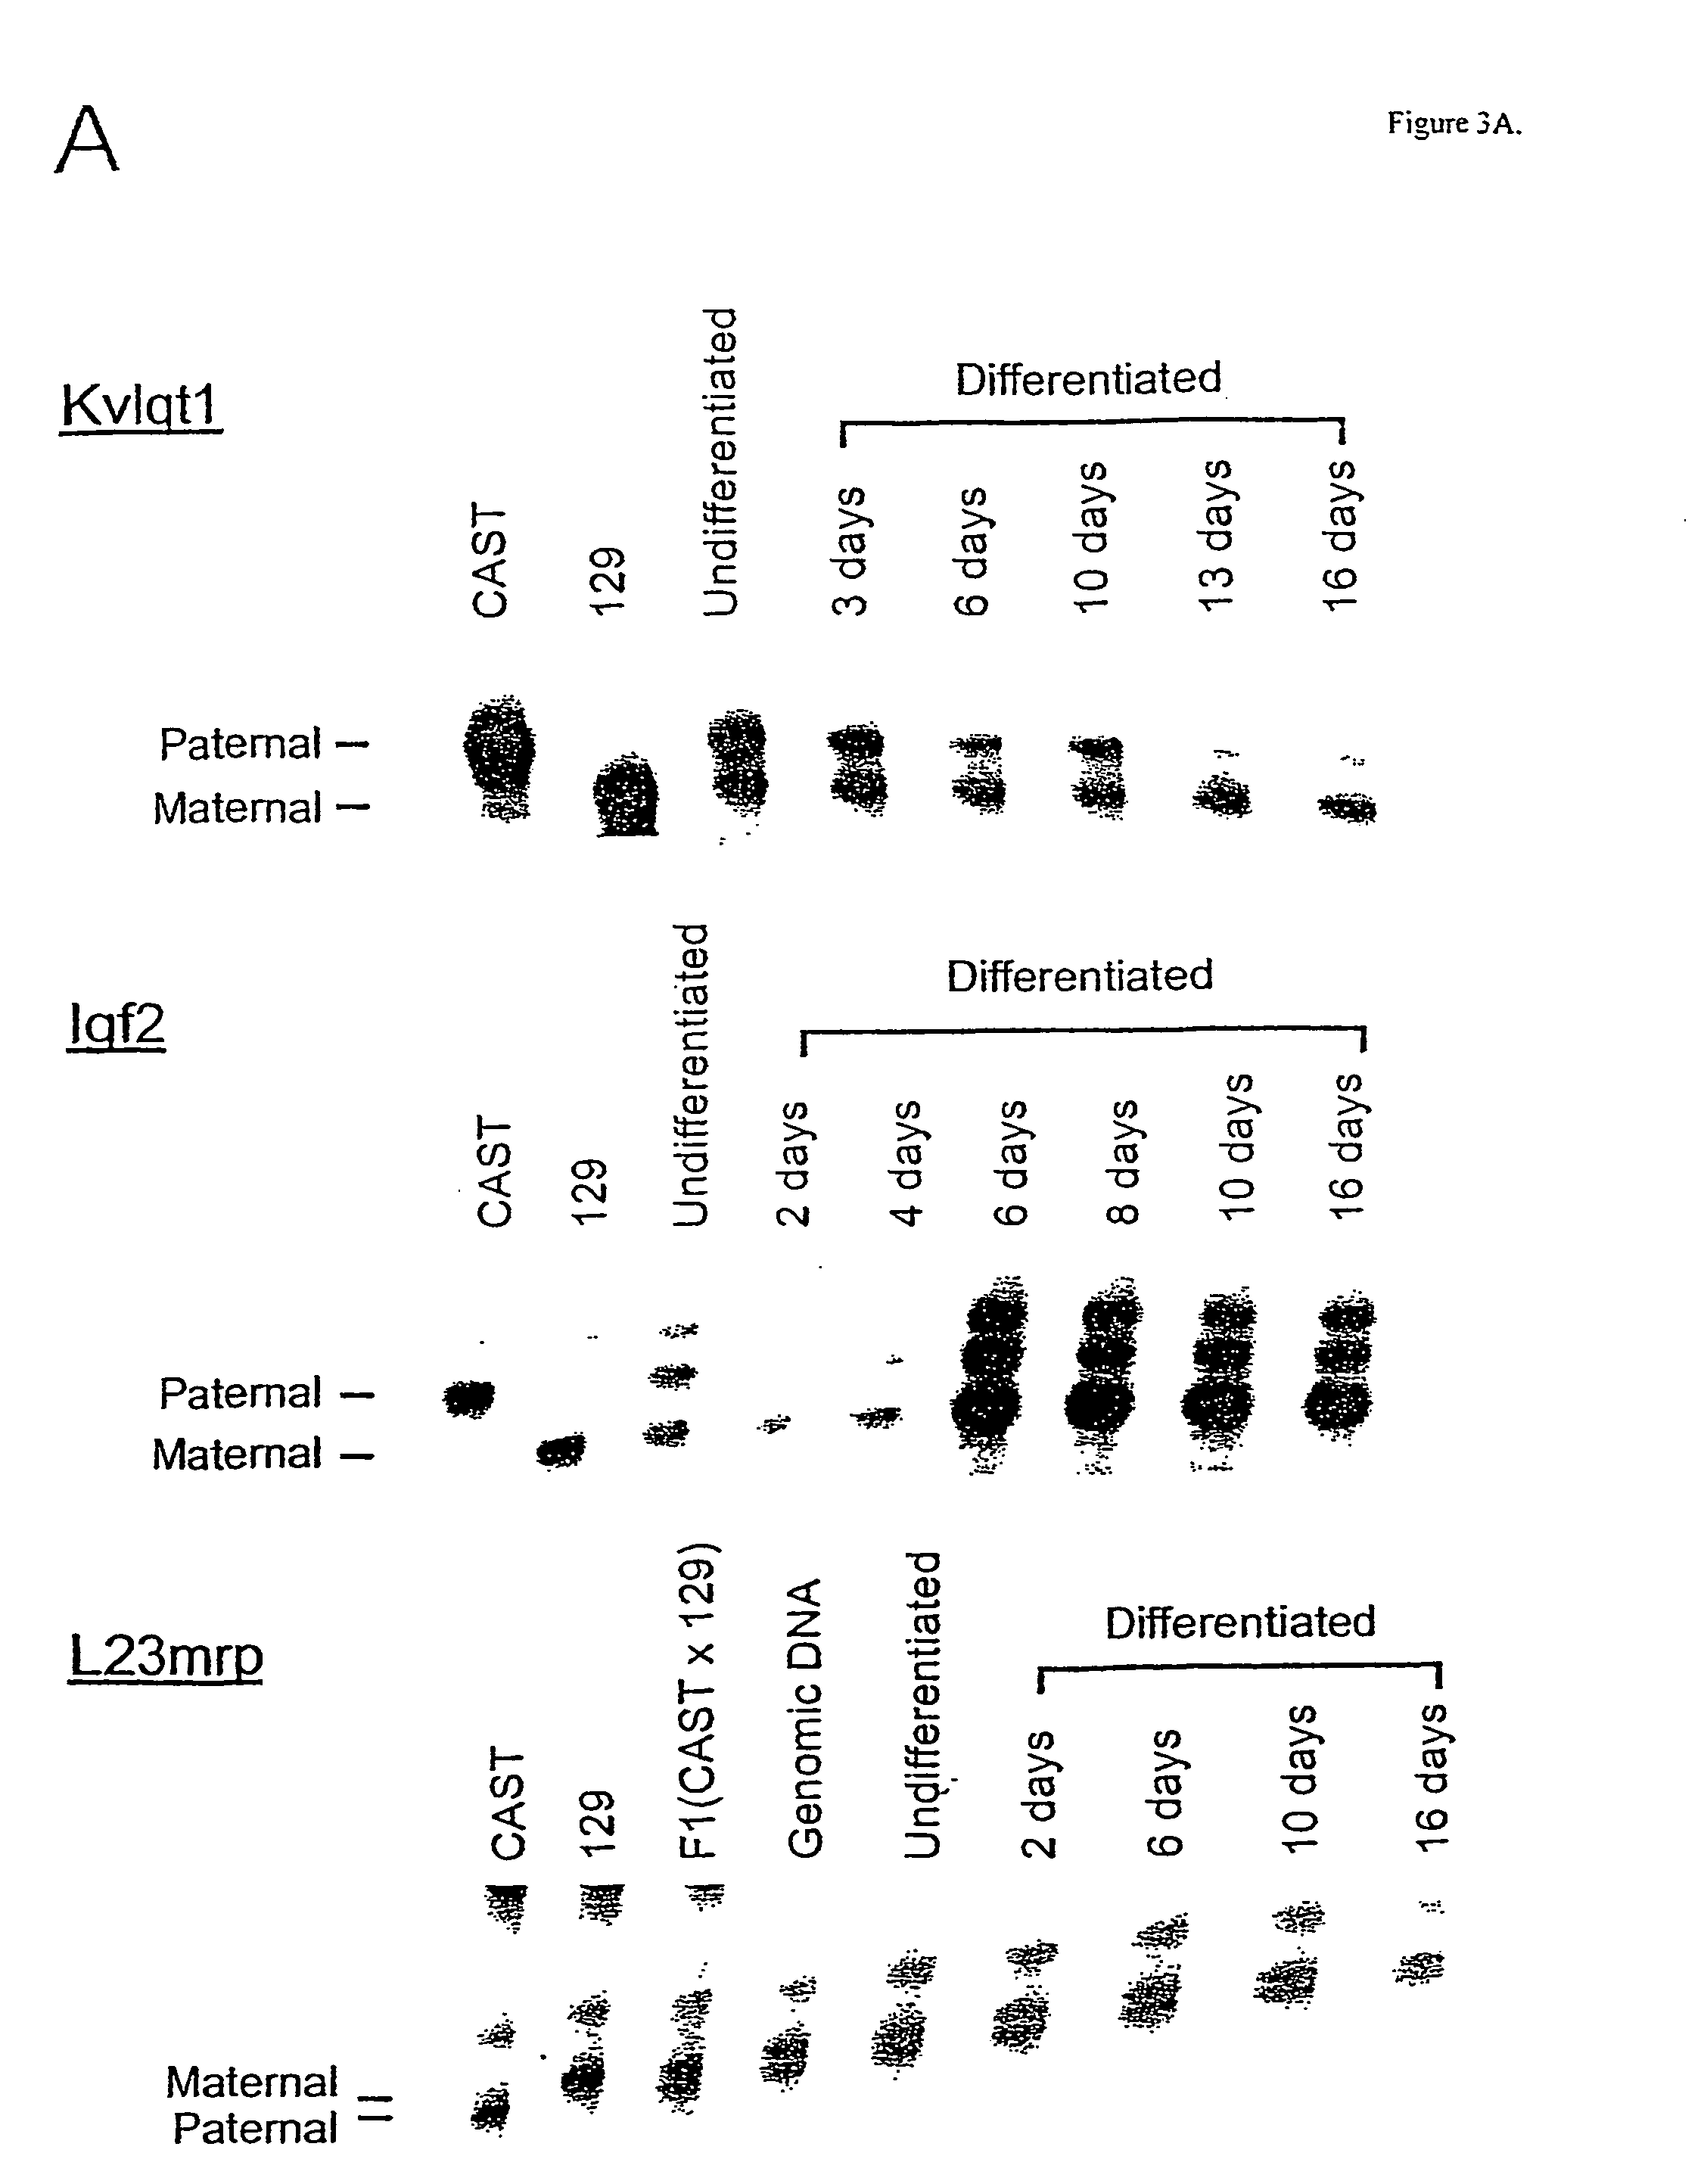 Methods for assaying gene imprinting and methylated cpg islands